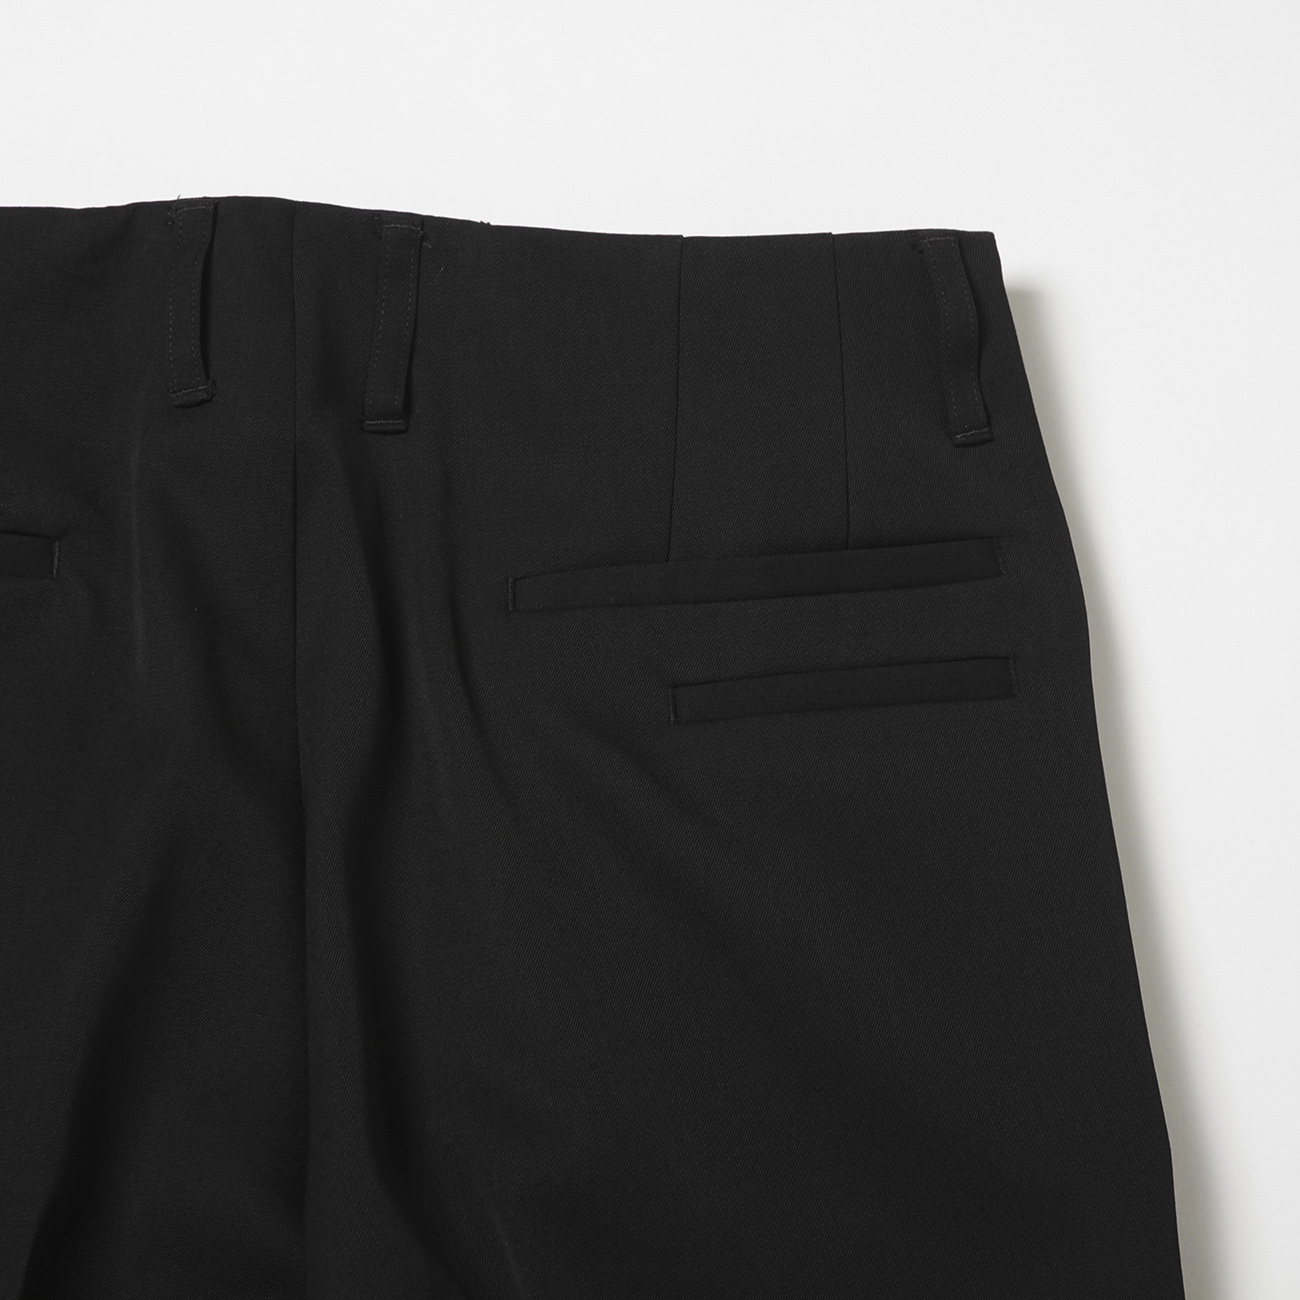 th products QUINN Wide Tailored Pants スラックス パンツ メンズ 【超お買い得！】